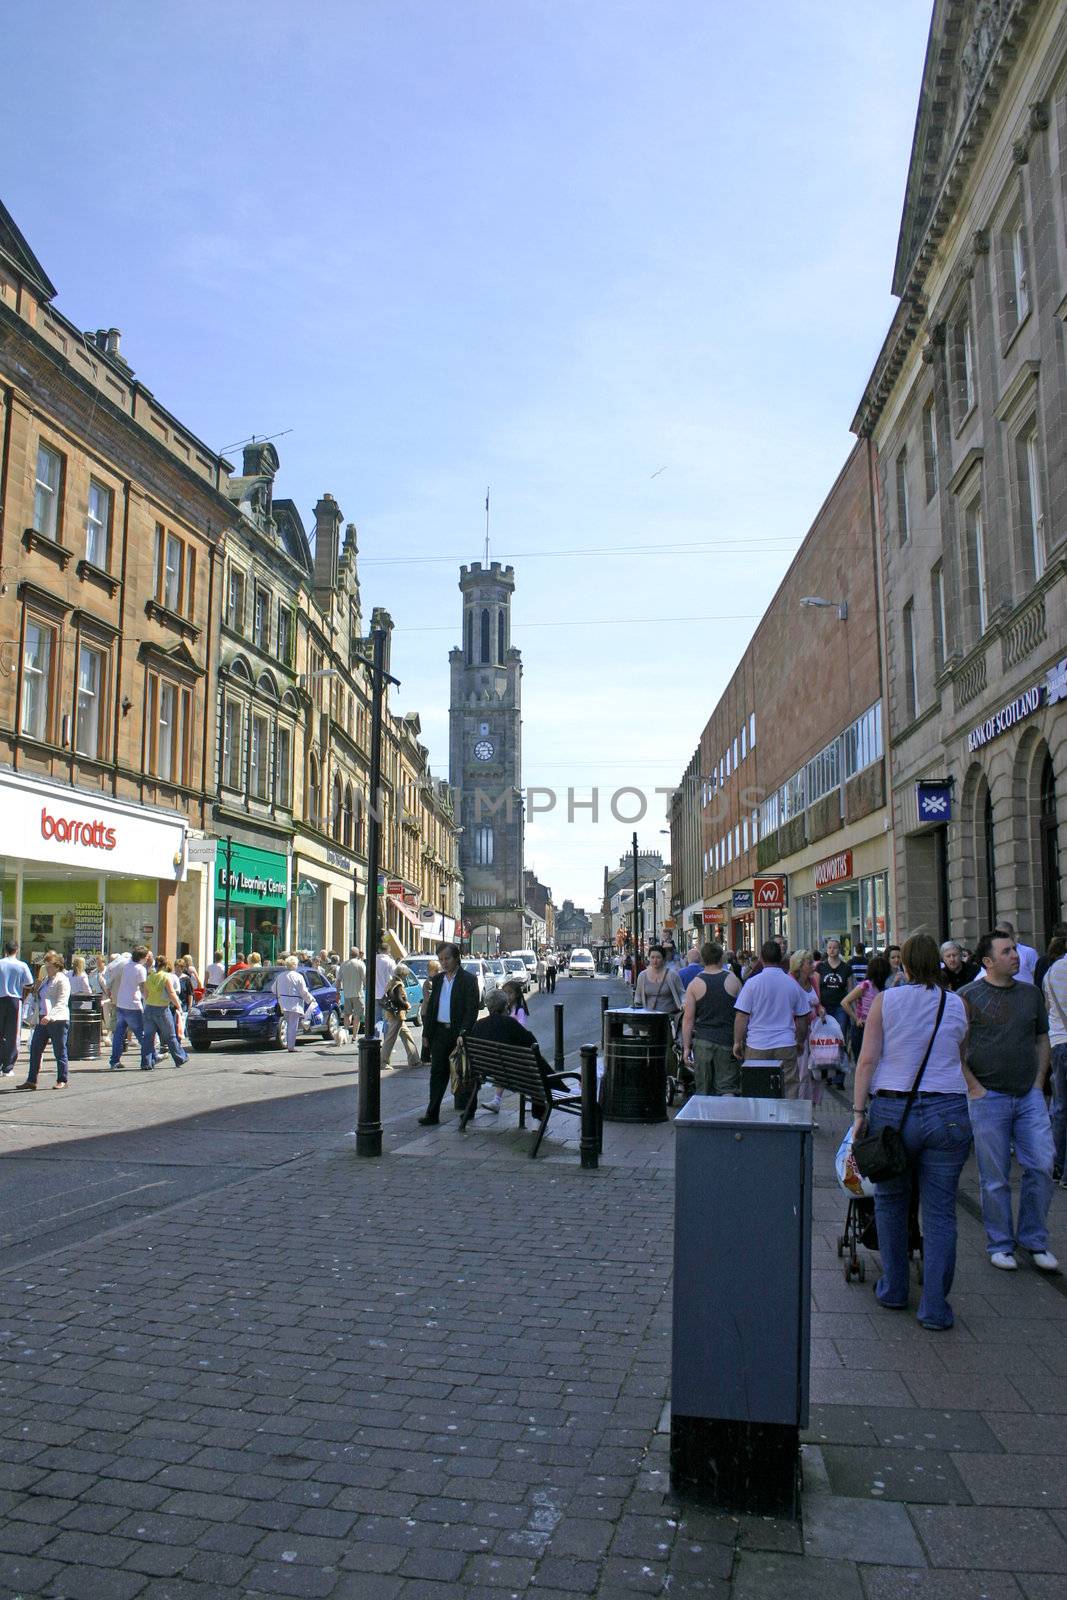 Shoppers in Ayr Scotland by green308